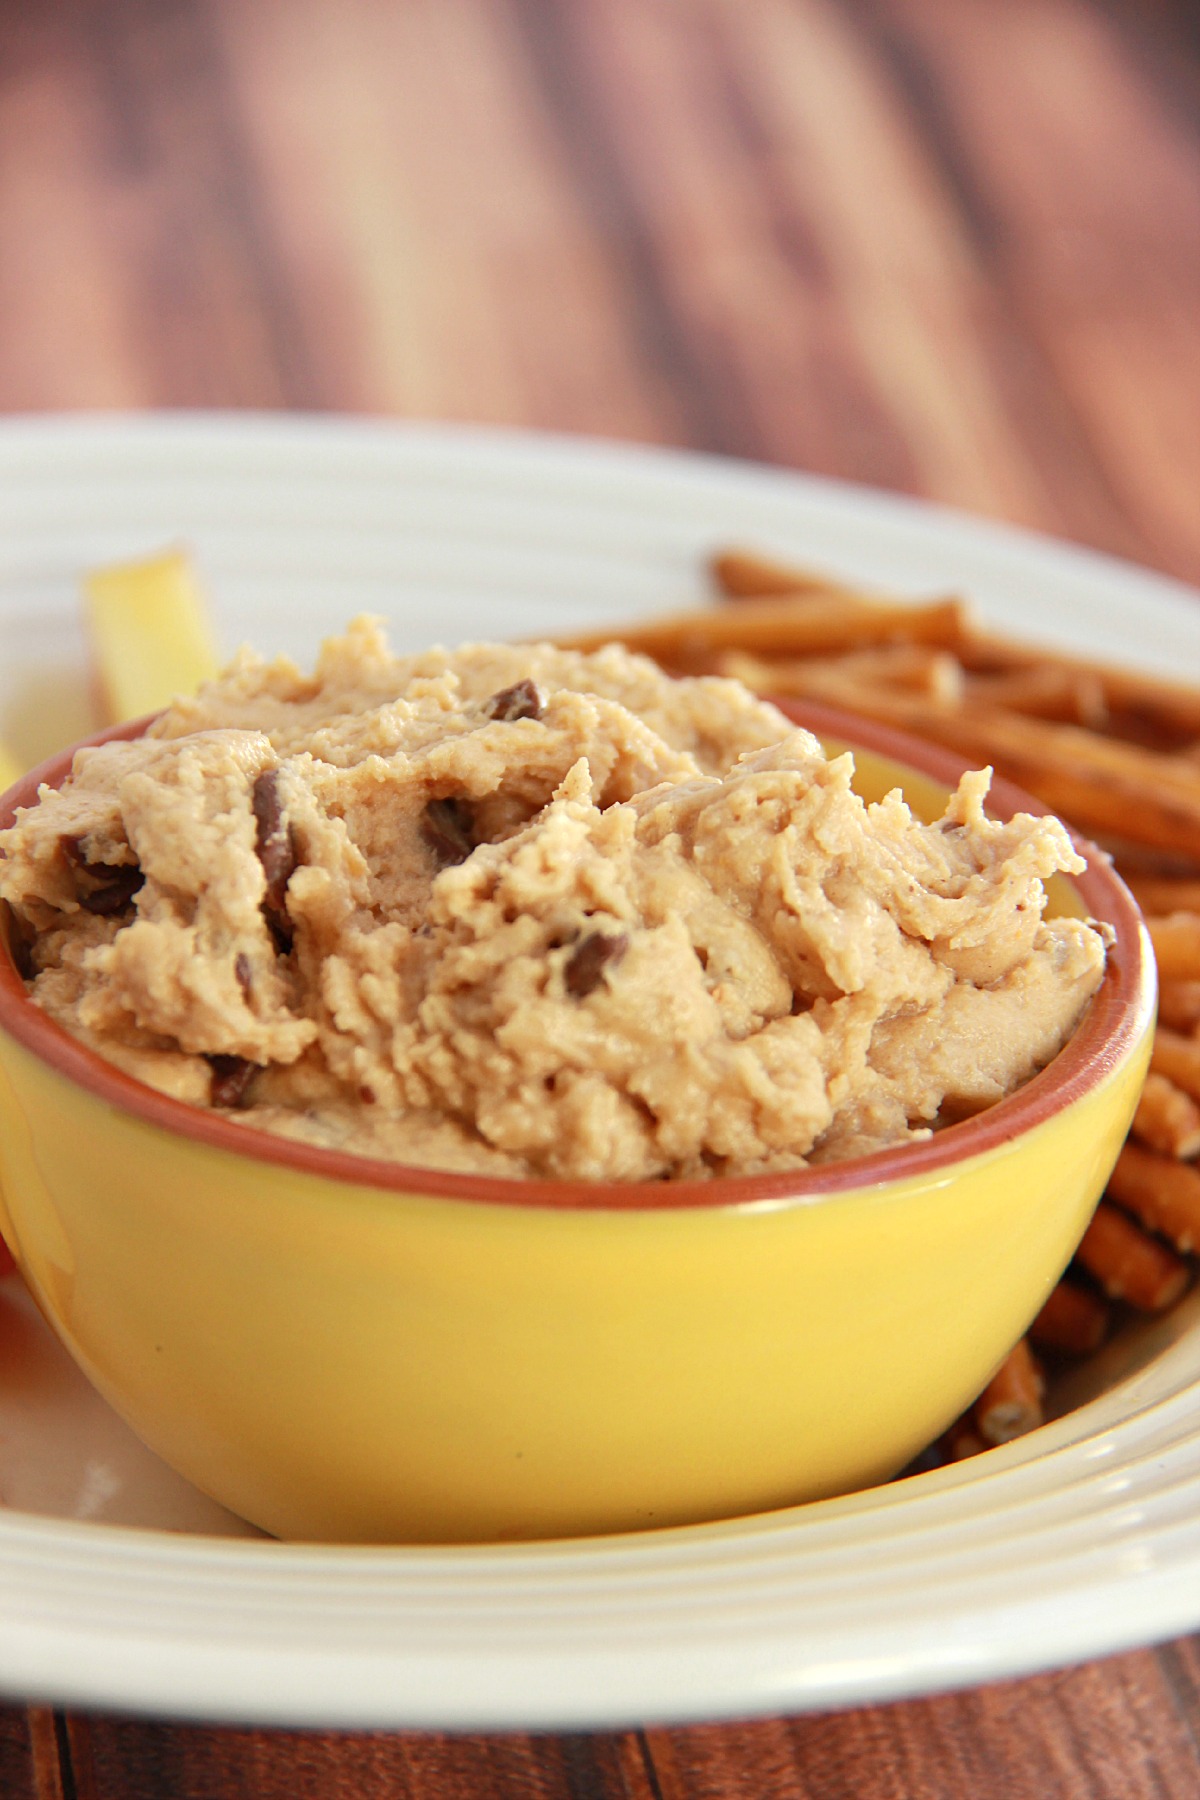 Looking for a way to eat cookie dough? Try this delicious peanut butter cookie dough dip and your sweet tooth will be thanking you. Great as a party dessert or as a tasty fruit dip, Peanut butter chocolate chip cookie dough dip will become a favorite.